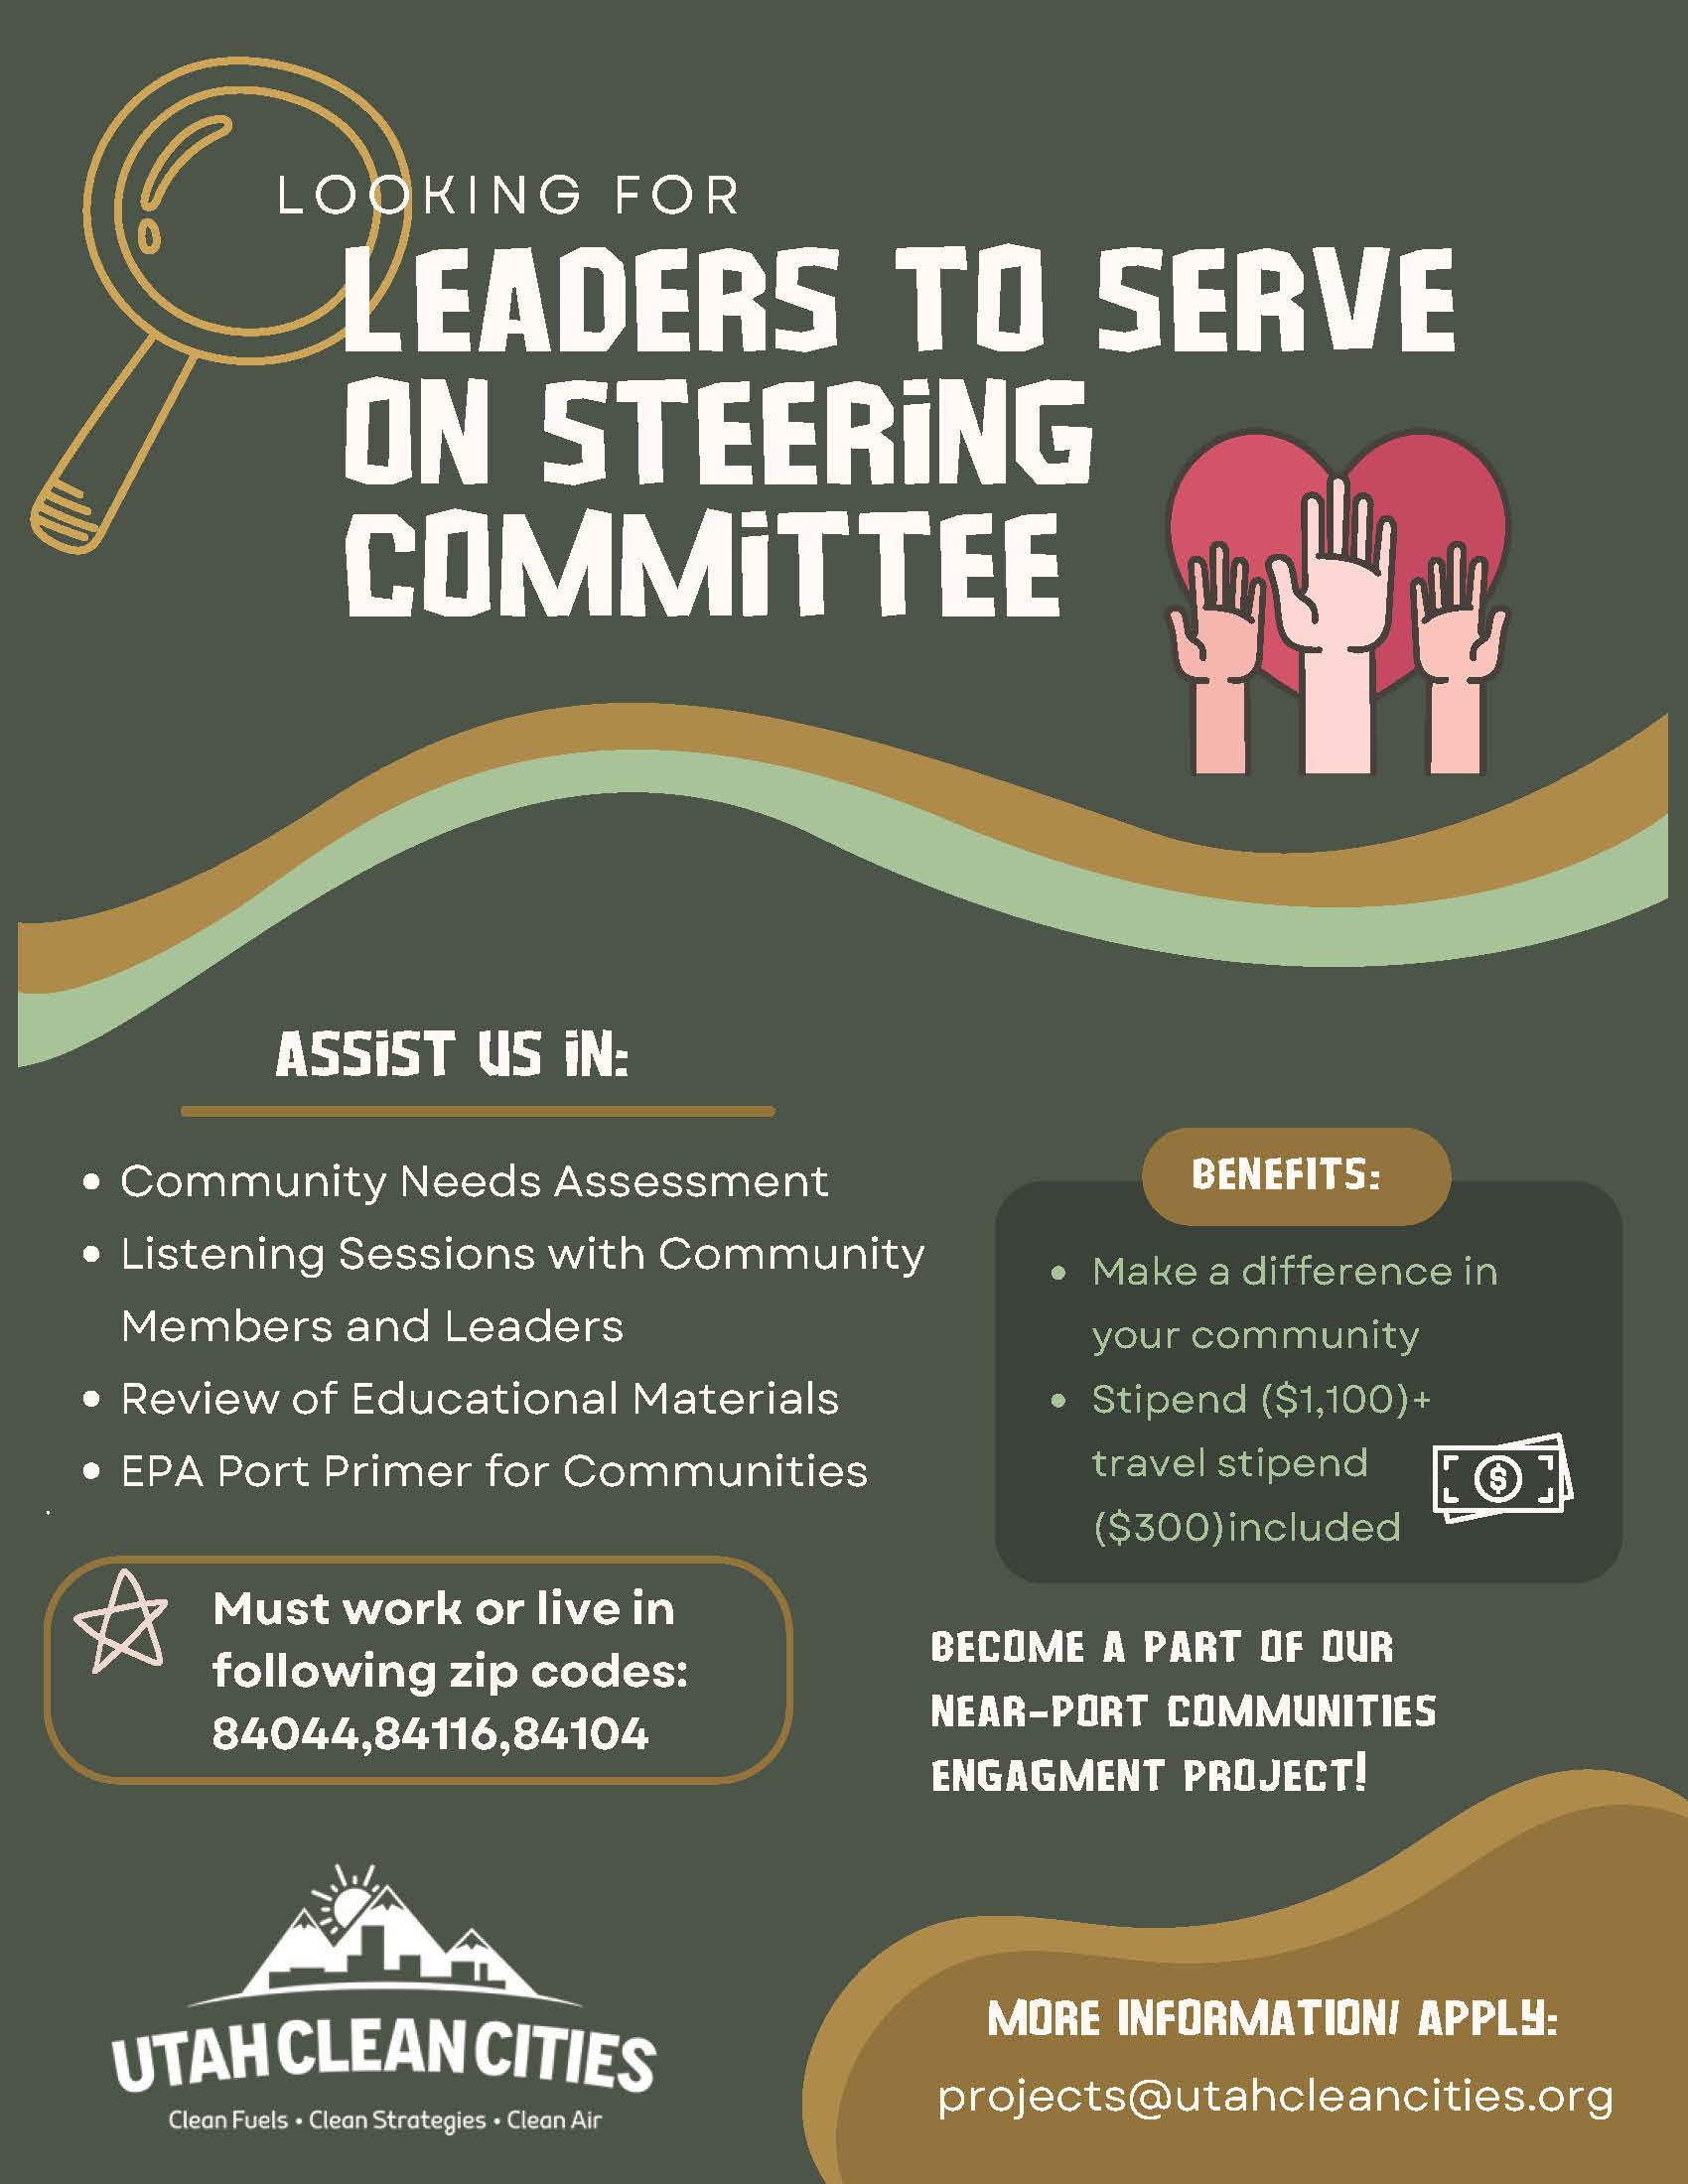 Utah Clean Cities is looking for leaders to serve on their Steering Committee.

Assist us in:
Community Needs Assessment, Listening Sessions with Community Members and Leaders, Review of Educational Materials, and EPA Port Primer for Communities.

Benefits include: Making a difference in
your community, an $1,100 stipend, and a $300 travel stipend.

Must work or live in following zip codes: 84044, 84116, 84104

Become a part of our near-port communities engagement project!

For more information and to apply, email projects@utahcleancities.org.